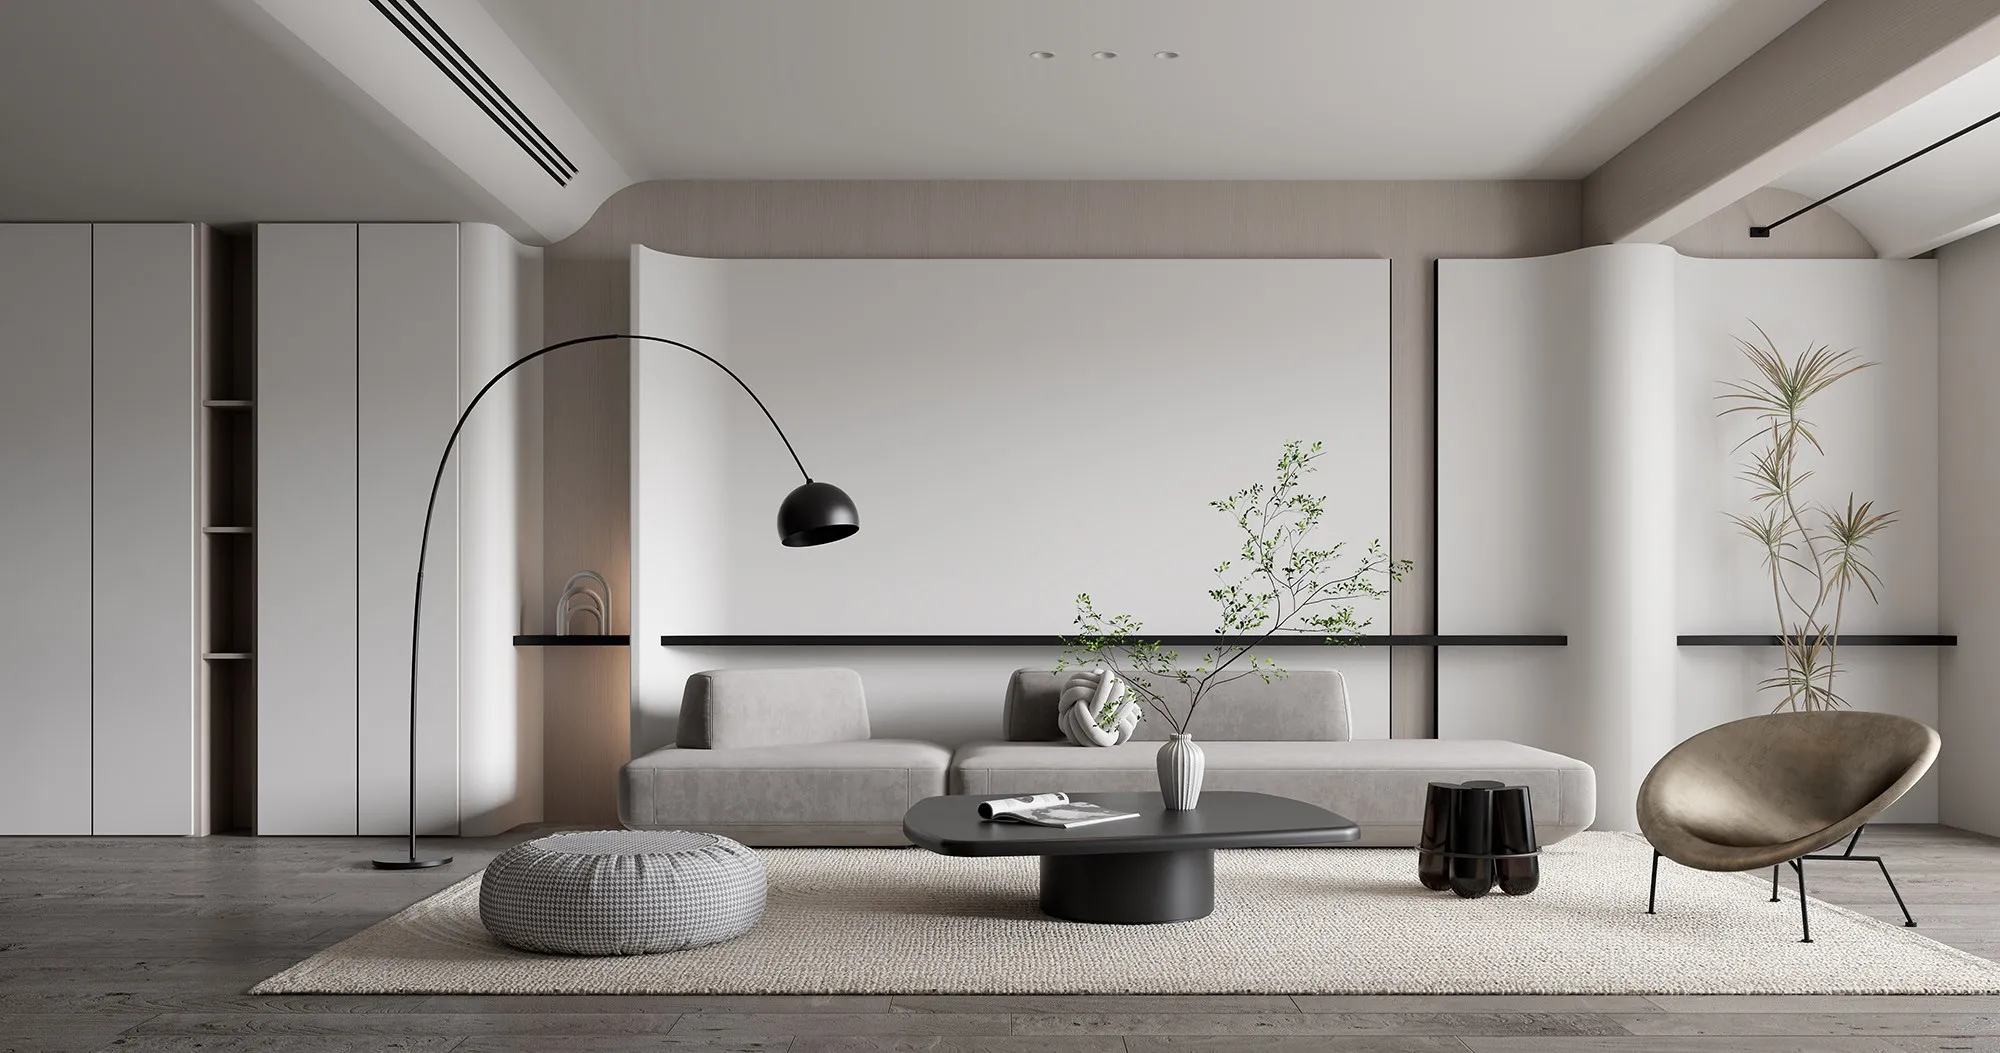 HOUSE SPACE 3D SCENES – LIVING ROOM – 0009